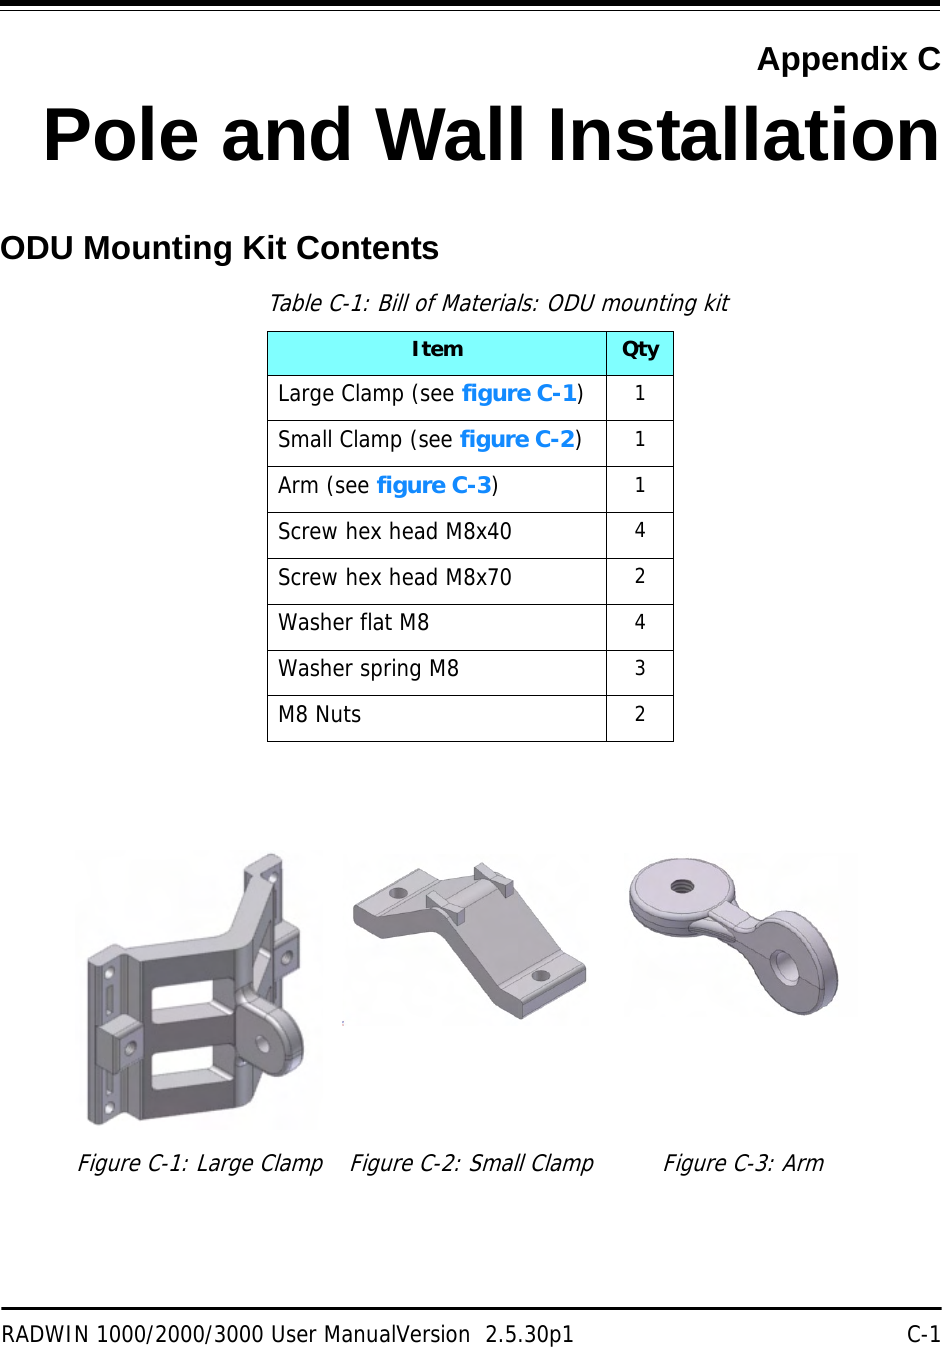 RADWIN 1000/2000/3000 User ManualVersion  2.5.30p1 C-1Appendix CPole and Wall InstallationODU Mounting Kit ContentsTable C-1: Bill of Materials: ODU mounting kitItem QtyLarge Clamp (see figure C-1)1Small Clamp (see figure C-2)1Arm (see figure C-3)1Screw hex head M8x40 4Screw hex head M8x70 2Washer flat M8 4Washer spring M8 3M8 Nuts 2Figure C-1: Large Clamp Figure C-2: Small Clamp Figure C-3: Arm